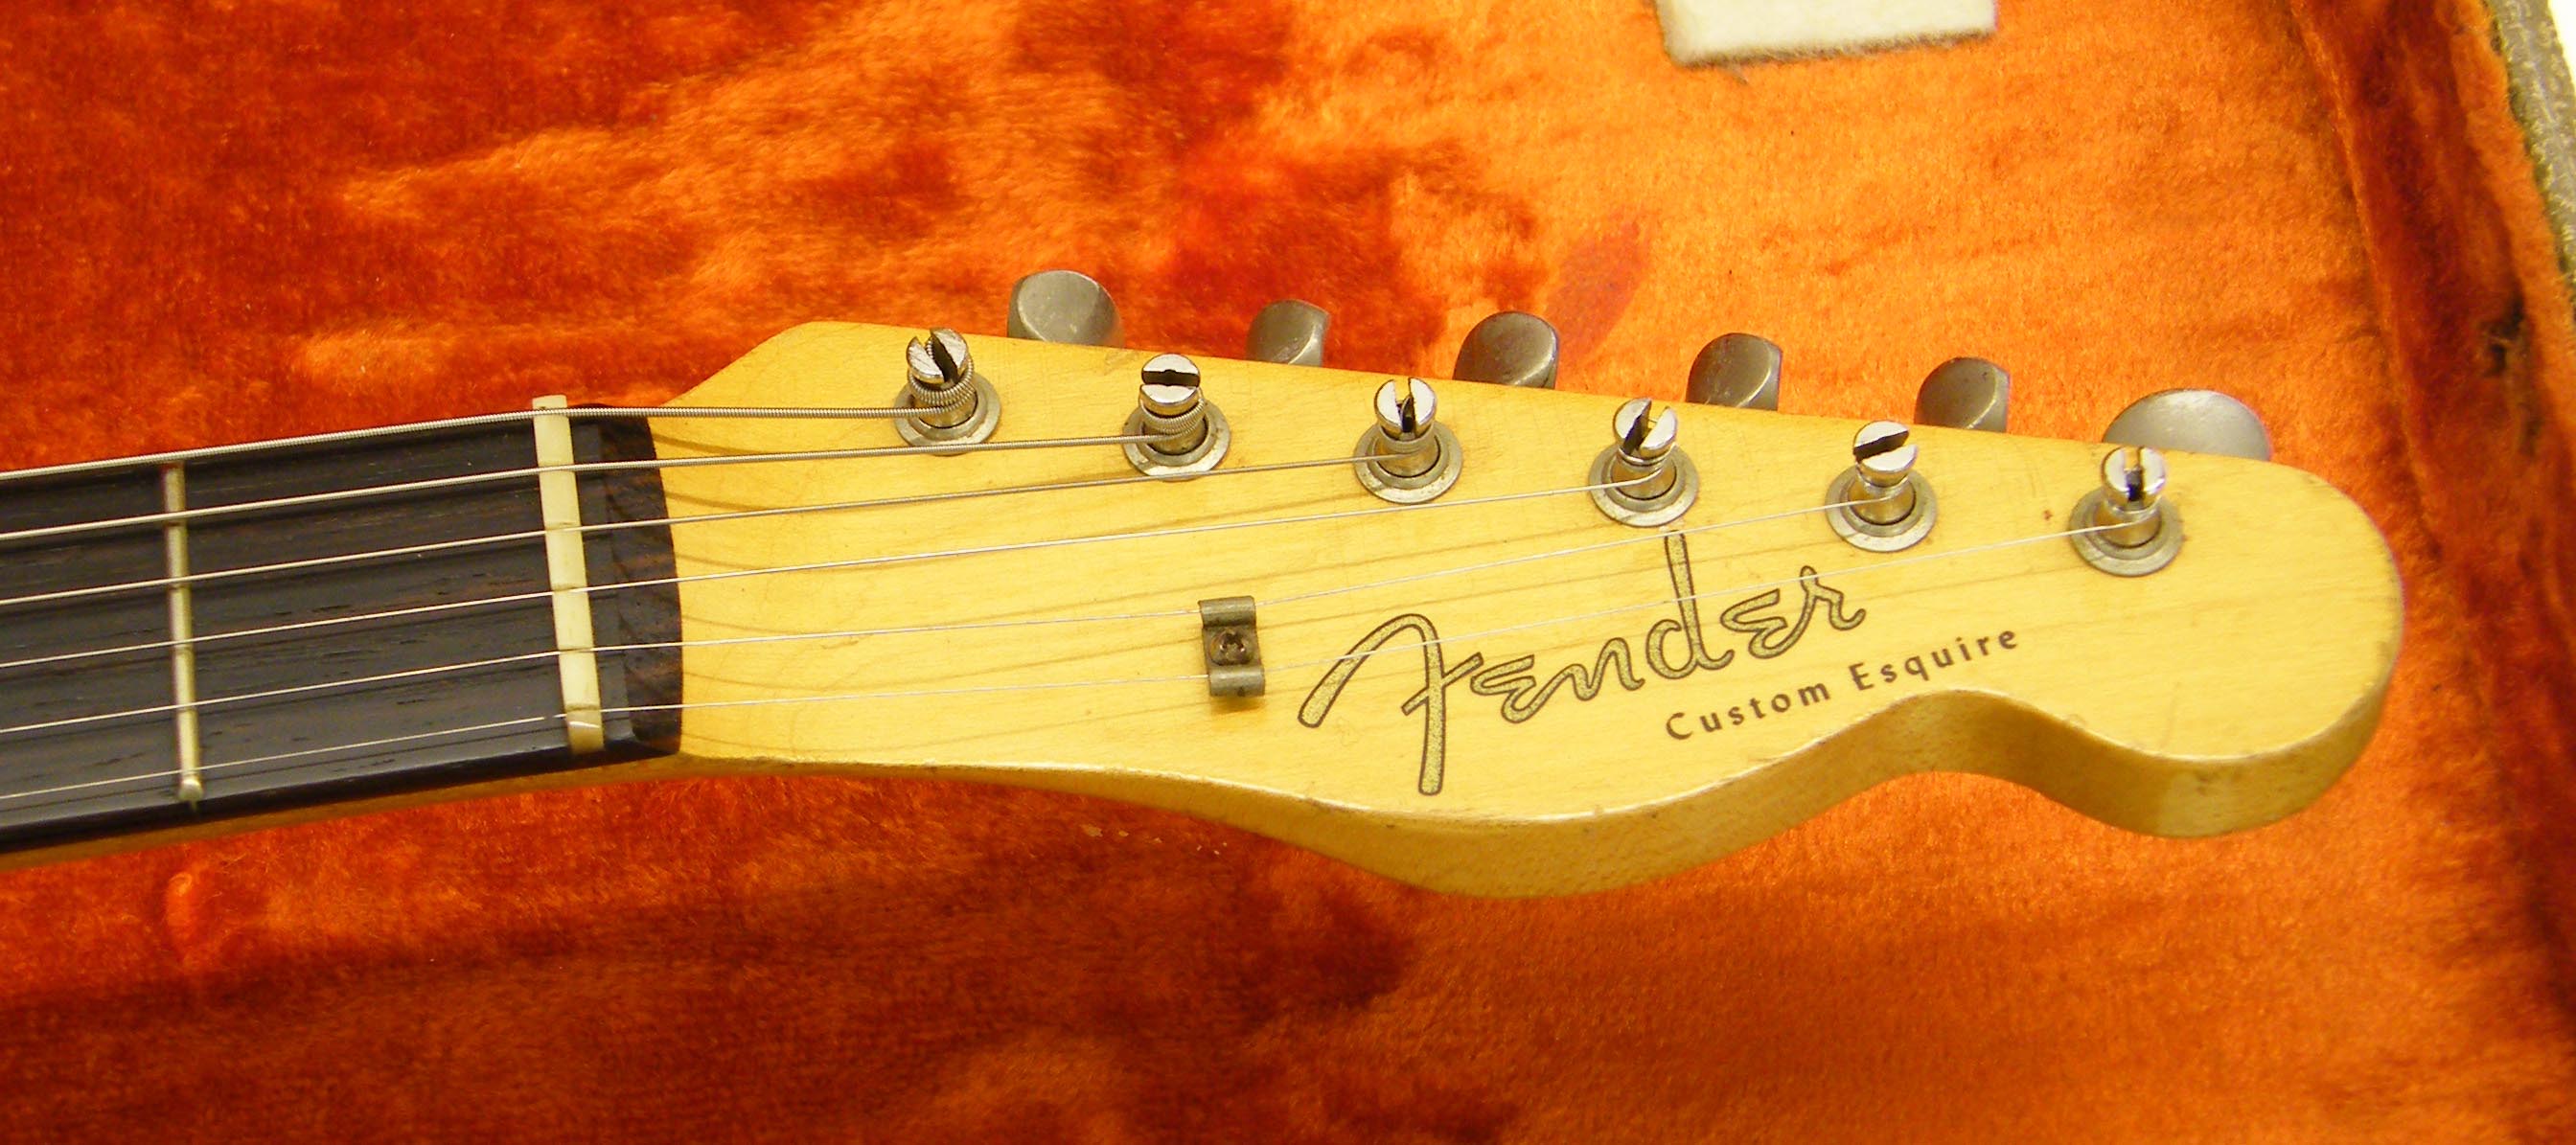 1960 Fender Custom Esquire electric guitar, made in USA, ser. no. 54146, sunburst finish with - Image 5 of 8